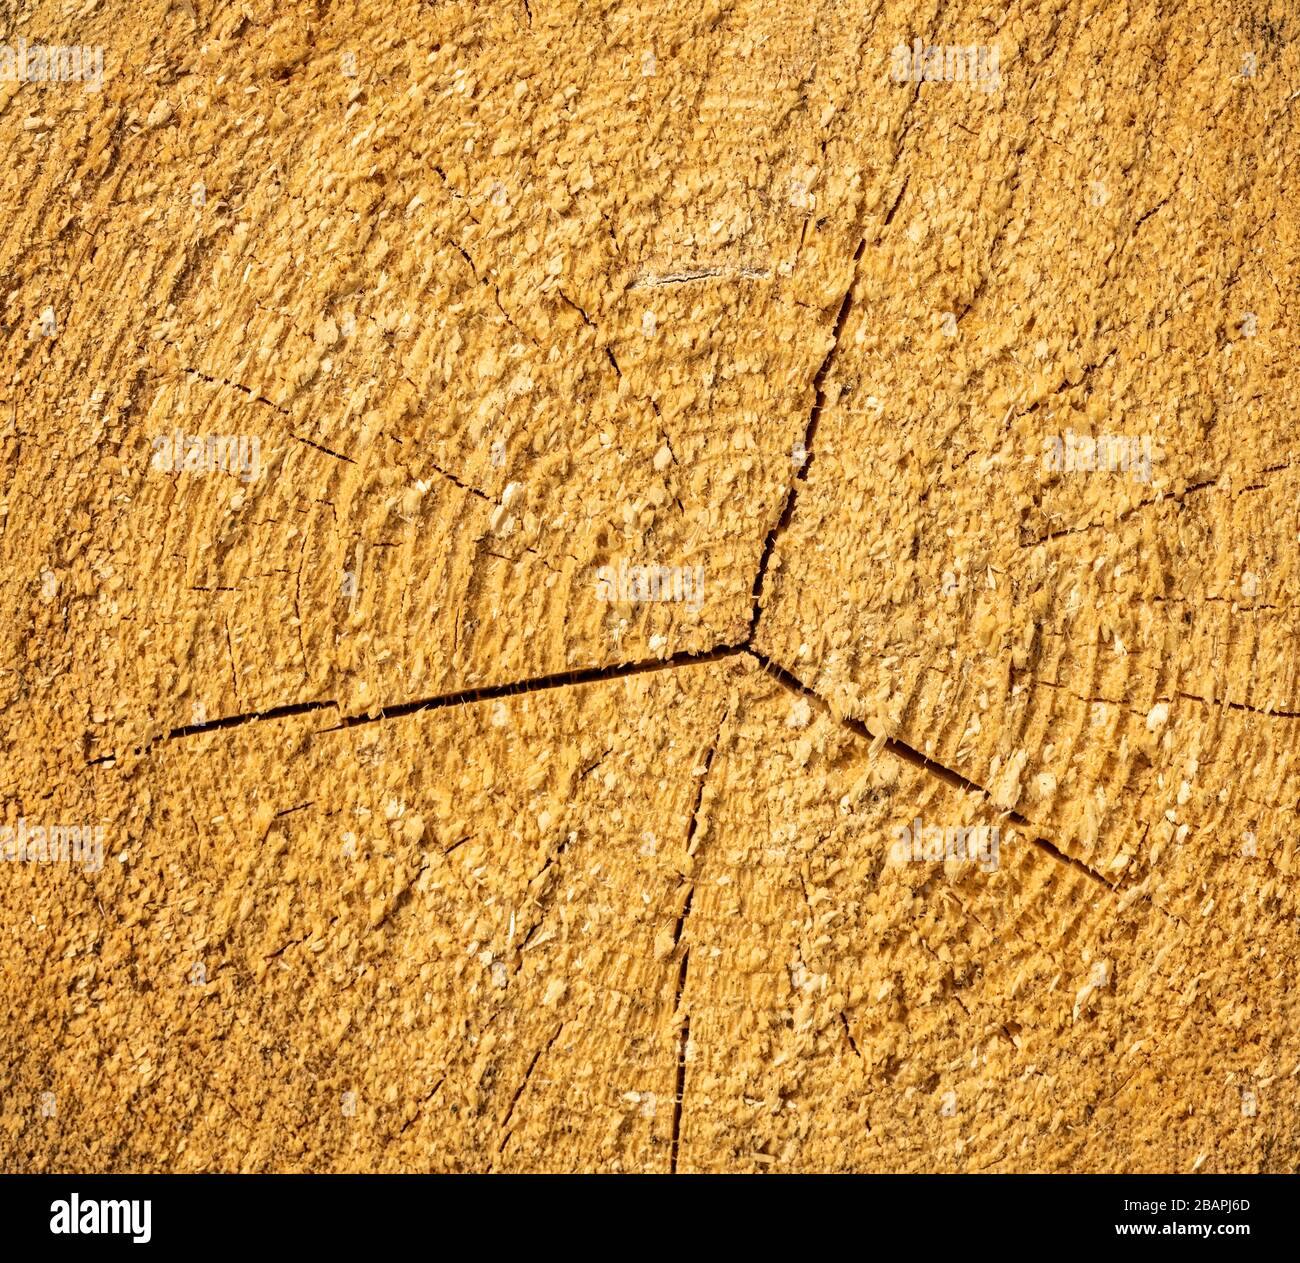 wood cut with annual rings and cracks, texture Stock Photo